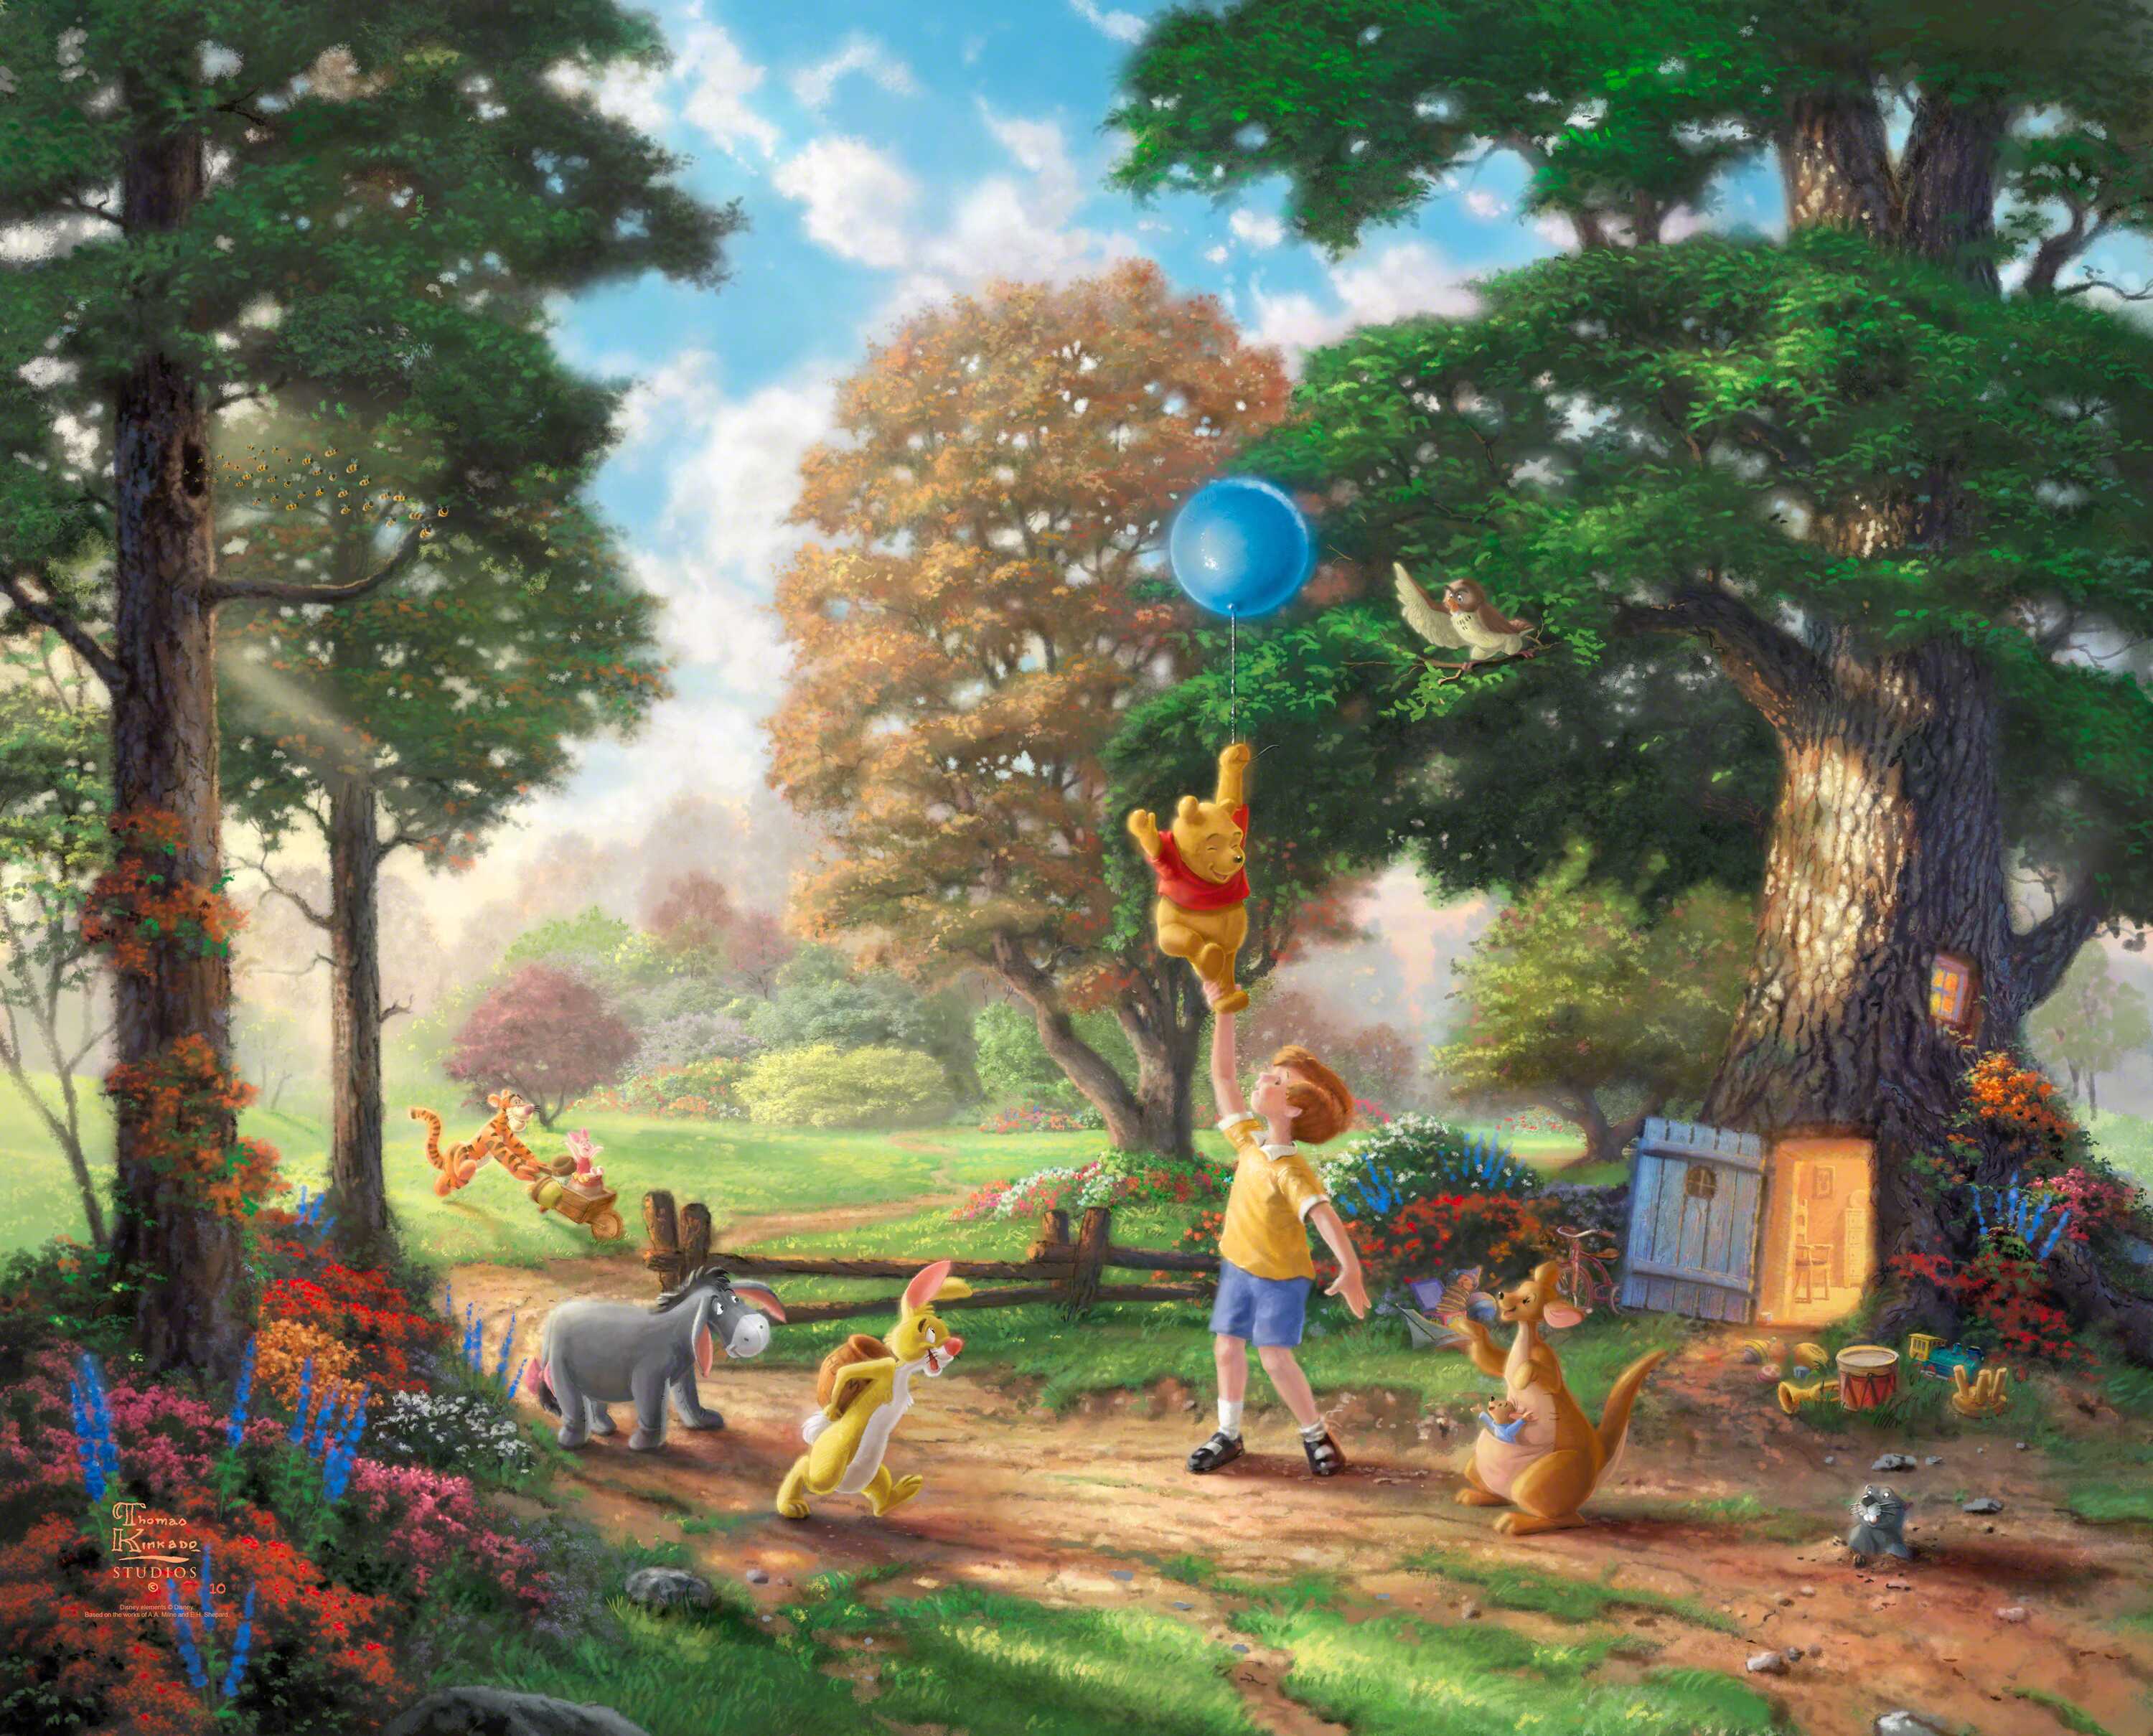 Awesome Winnie The Pooh Images Collection - Thomas Kinkade Disney Winnie The Pooh , HD Wallpaper & Backgrounds